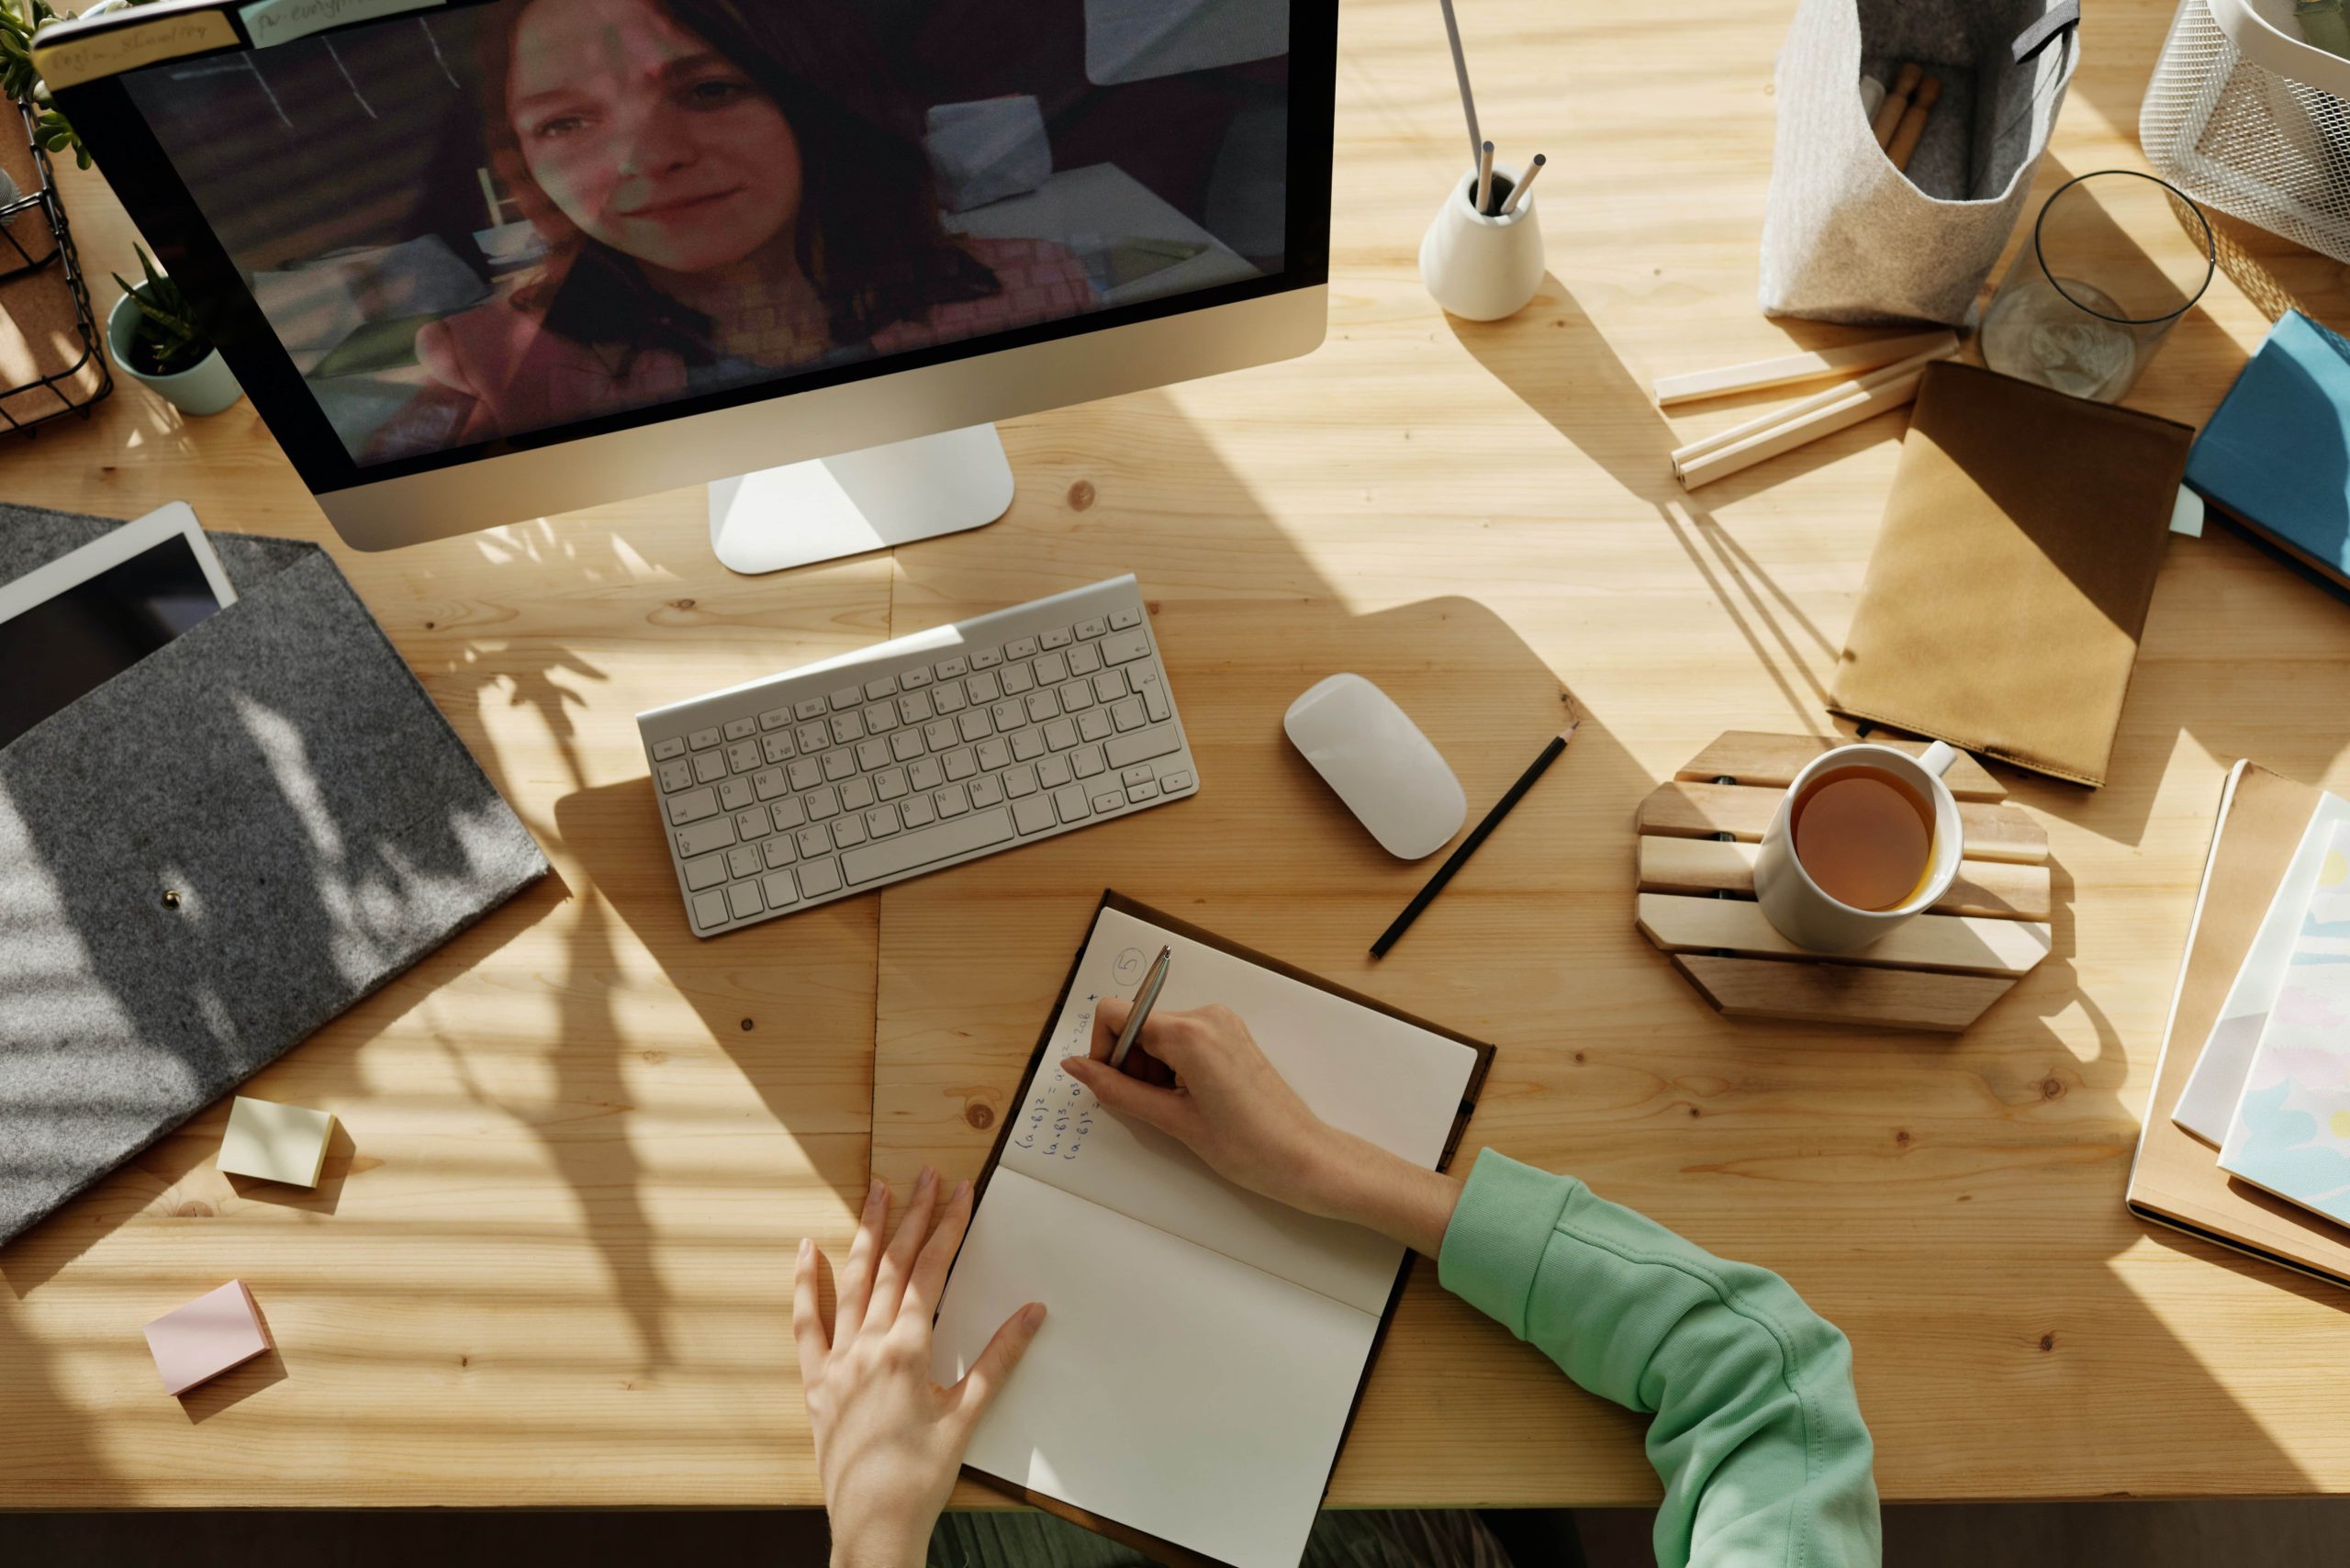 Video conferencing makes remote meetings face-to-face.